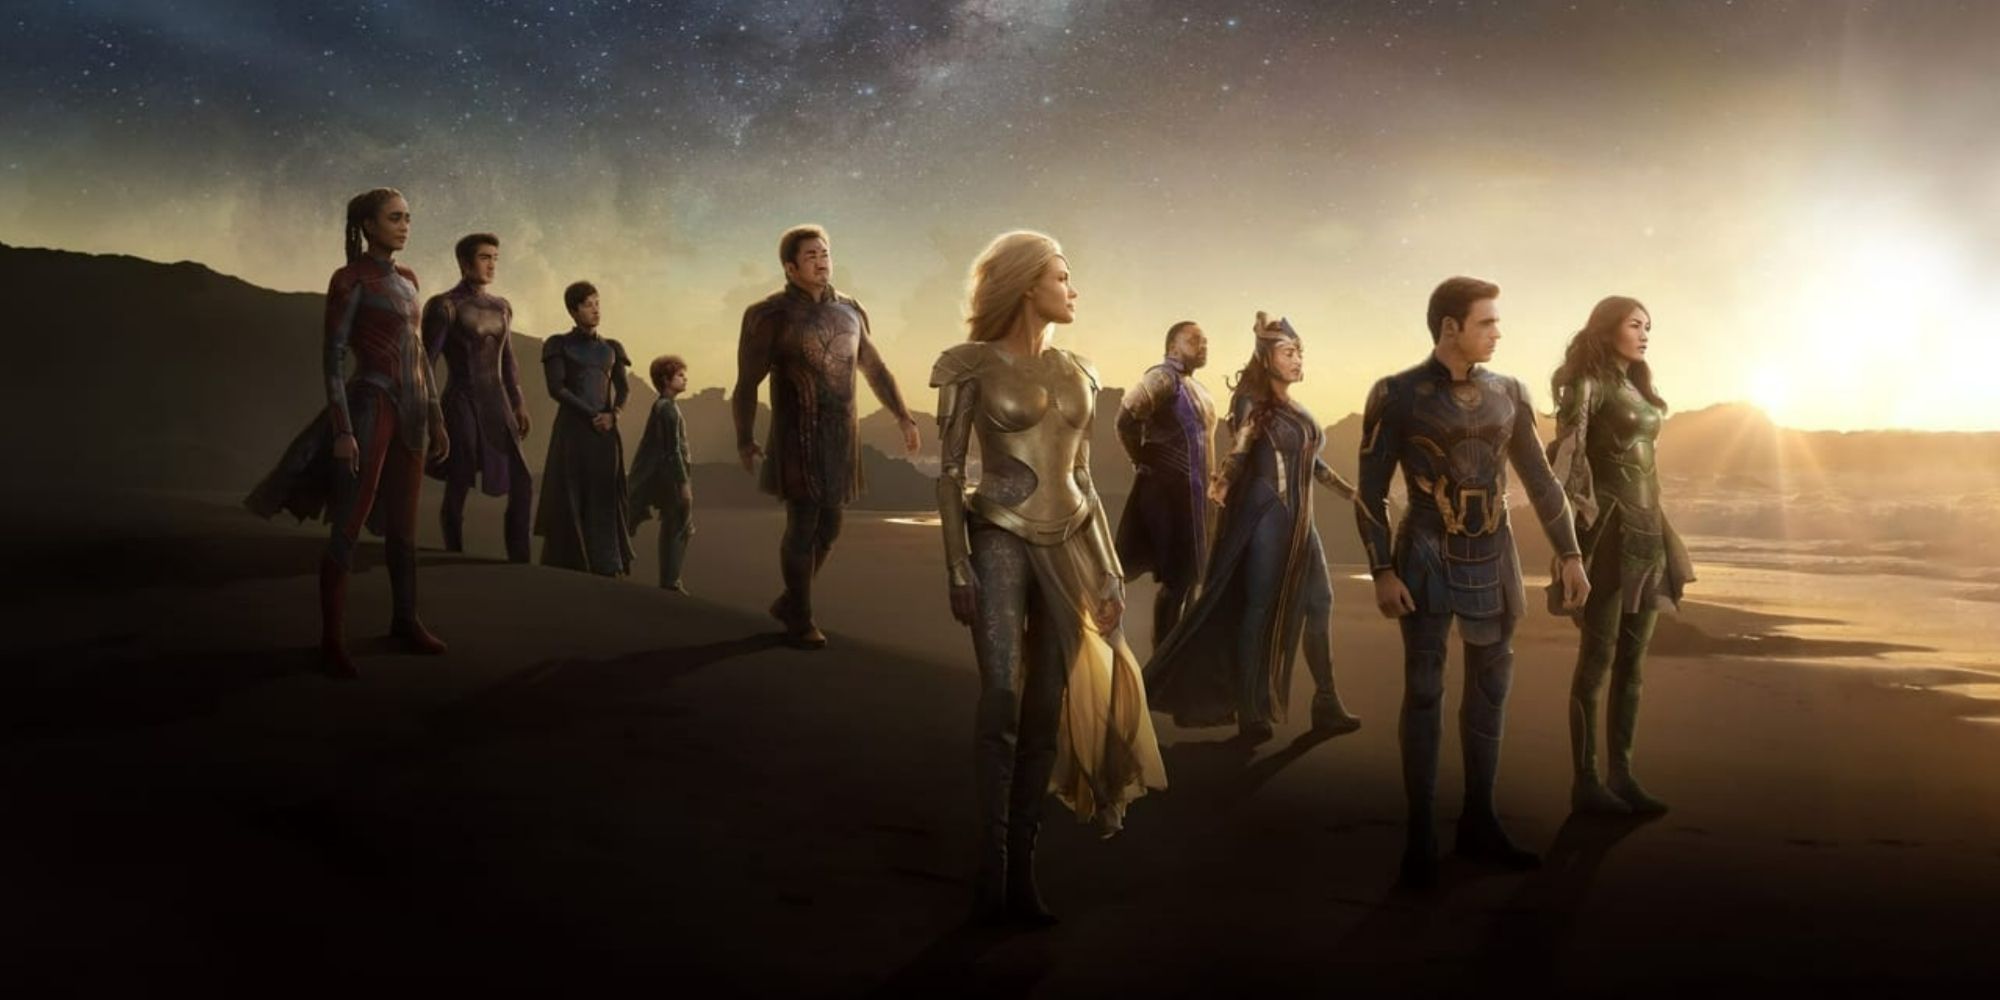 The MCU's Eternals stand together on a beach during a sunset.